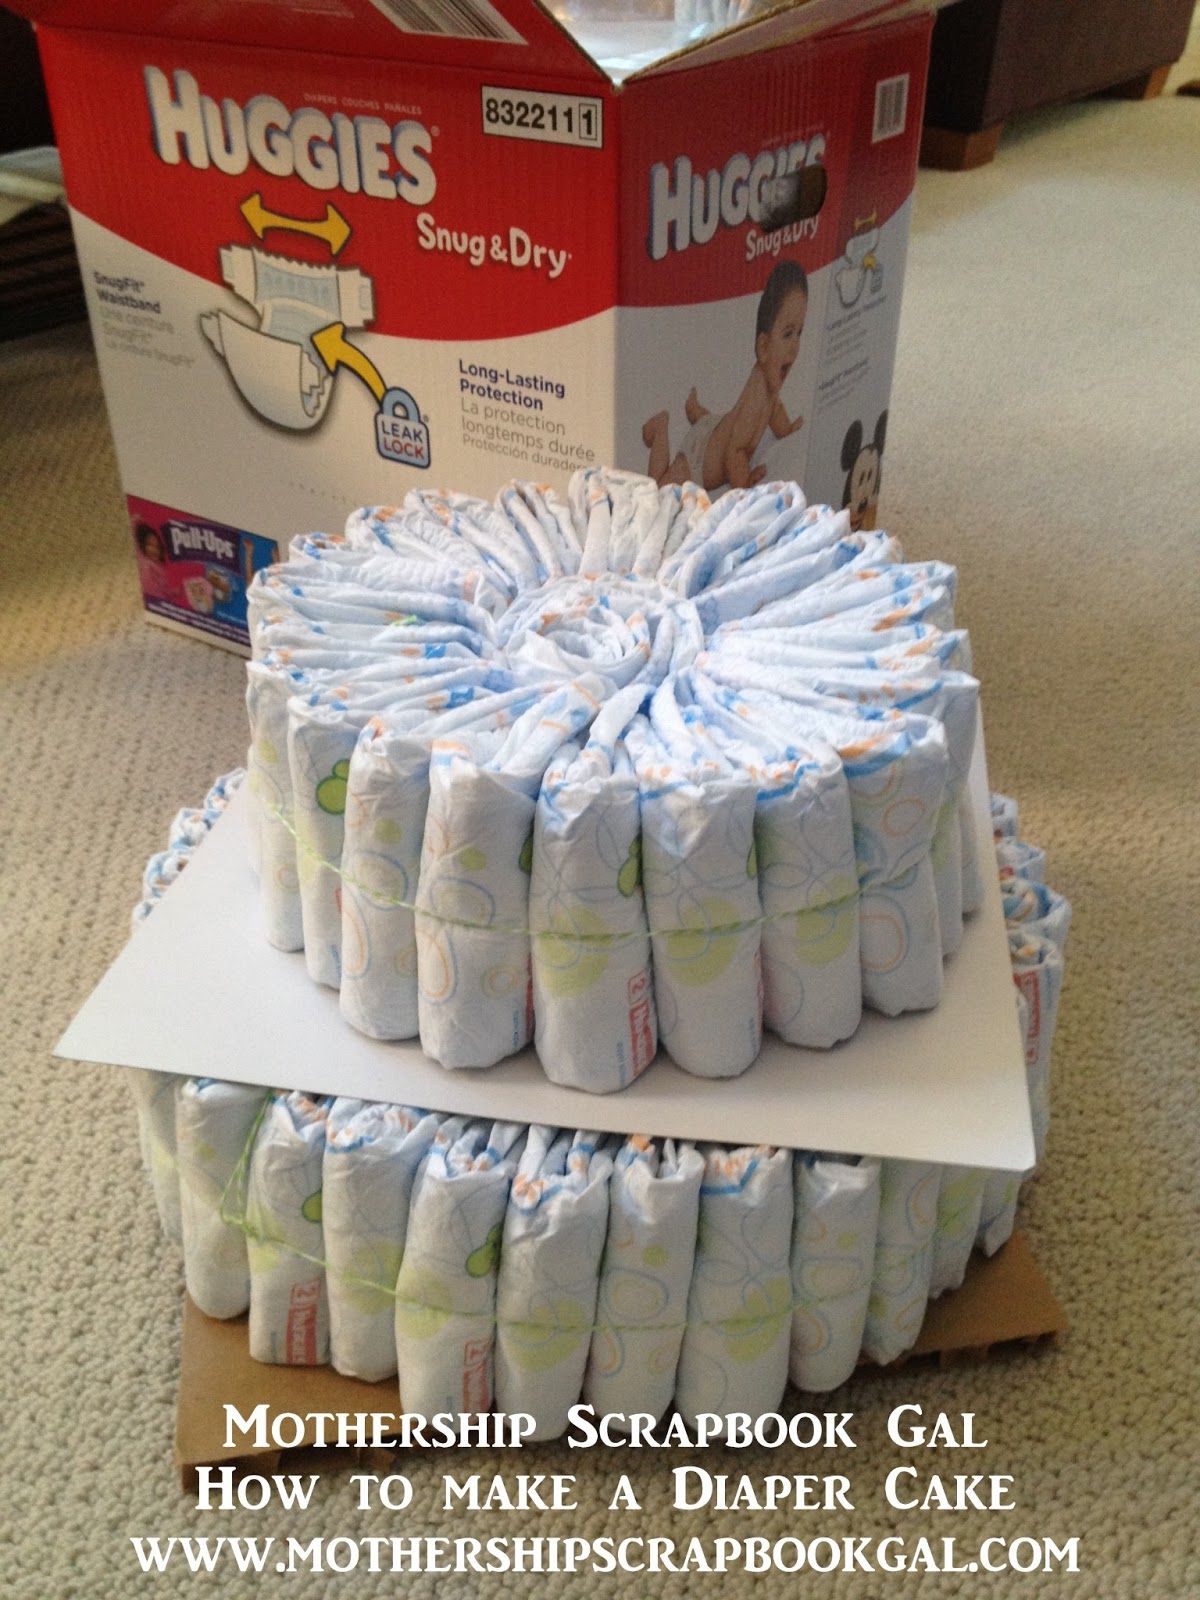 how to make nappy cakes for baby showers